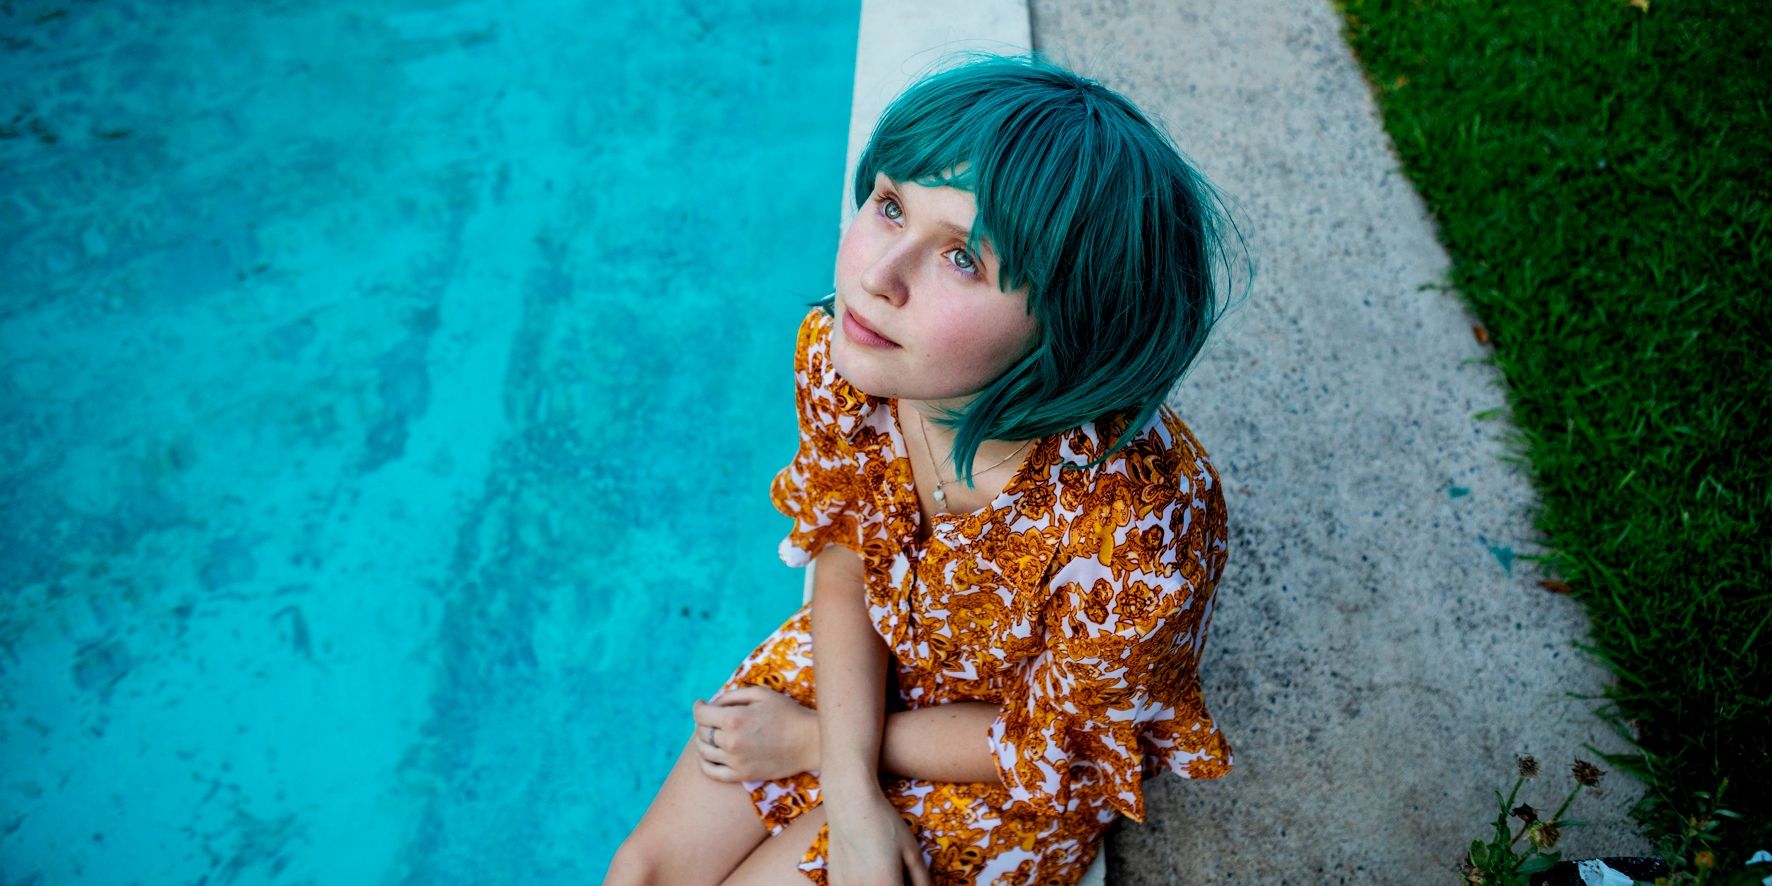 Eliza Scanlen as Milla sitting by the poolside with blue hair staring up at the sky